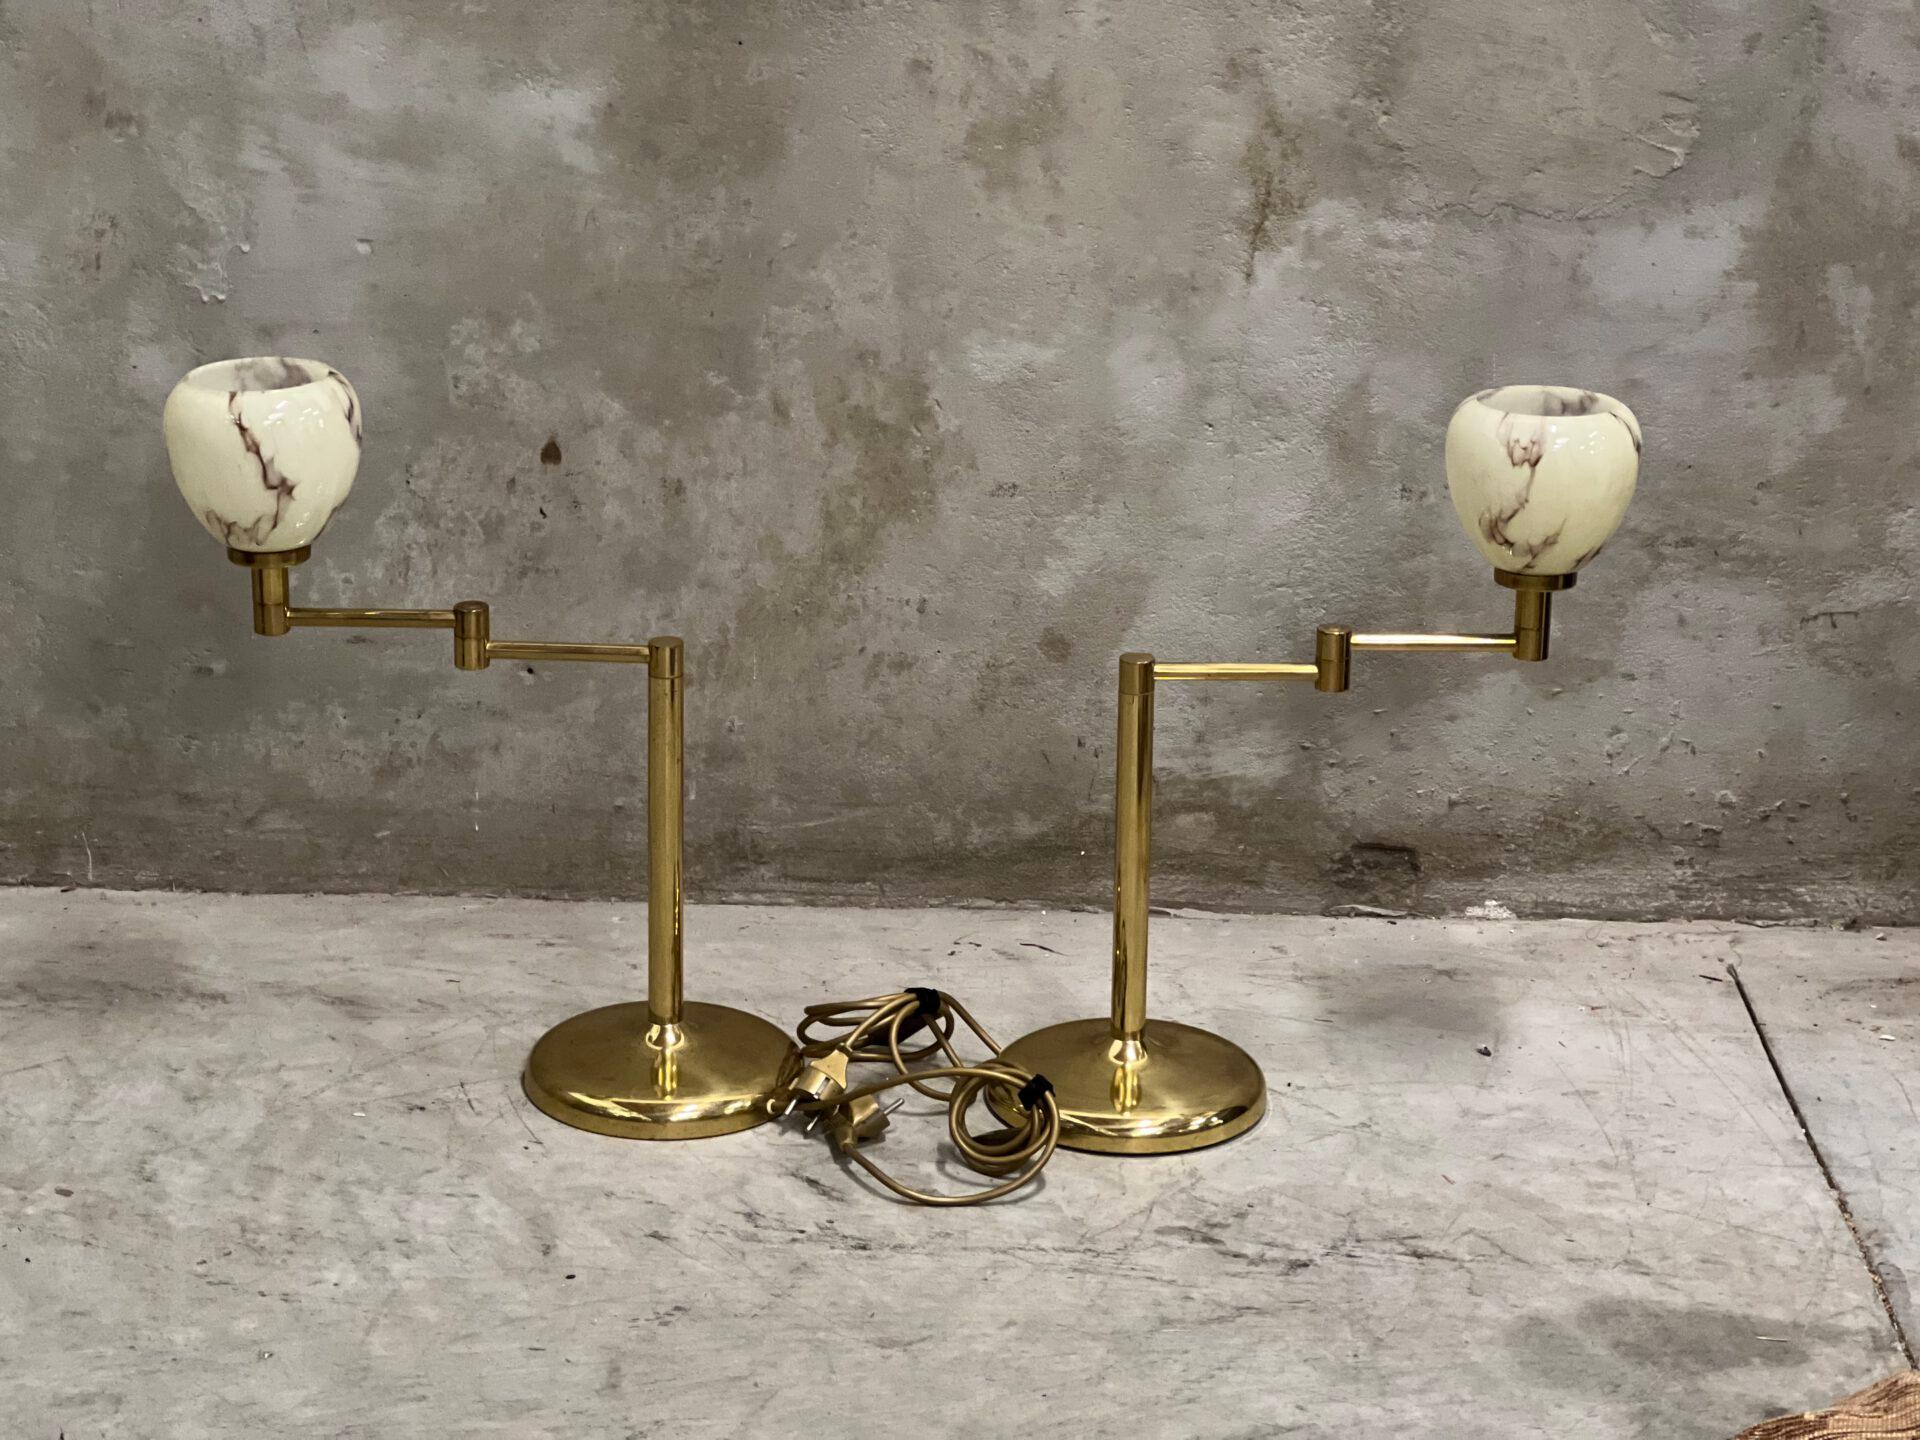 Sölken Leuchten 1970s design table lamp / desk lamp. Brass, heavy quality, marked on the foot. We have 2 identical ones. 

Price is per lamp.

 Can be fitted with any lampshade, it includes the glass Art-Deco shade. Gives a particularly beautiful